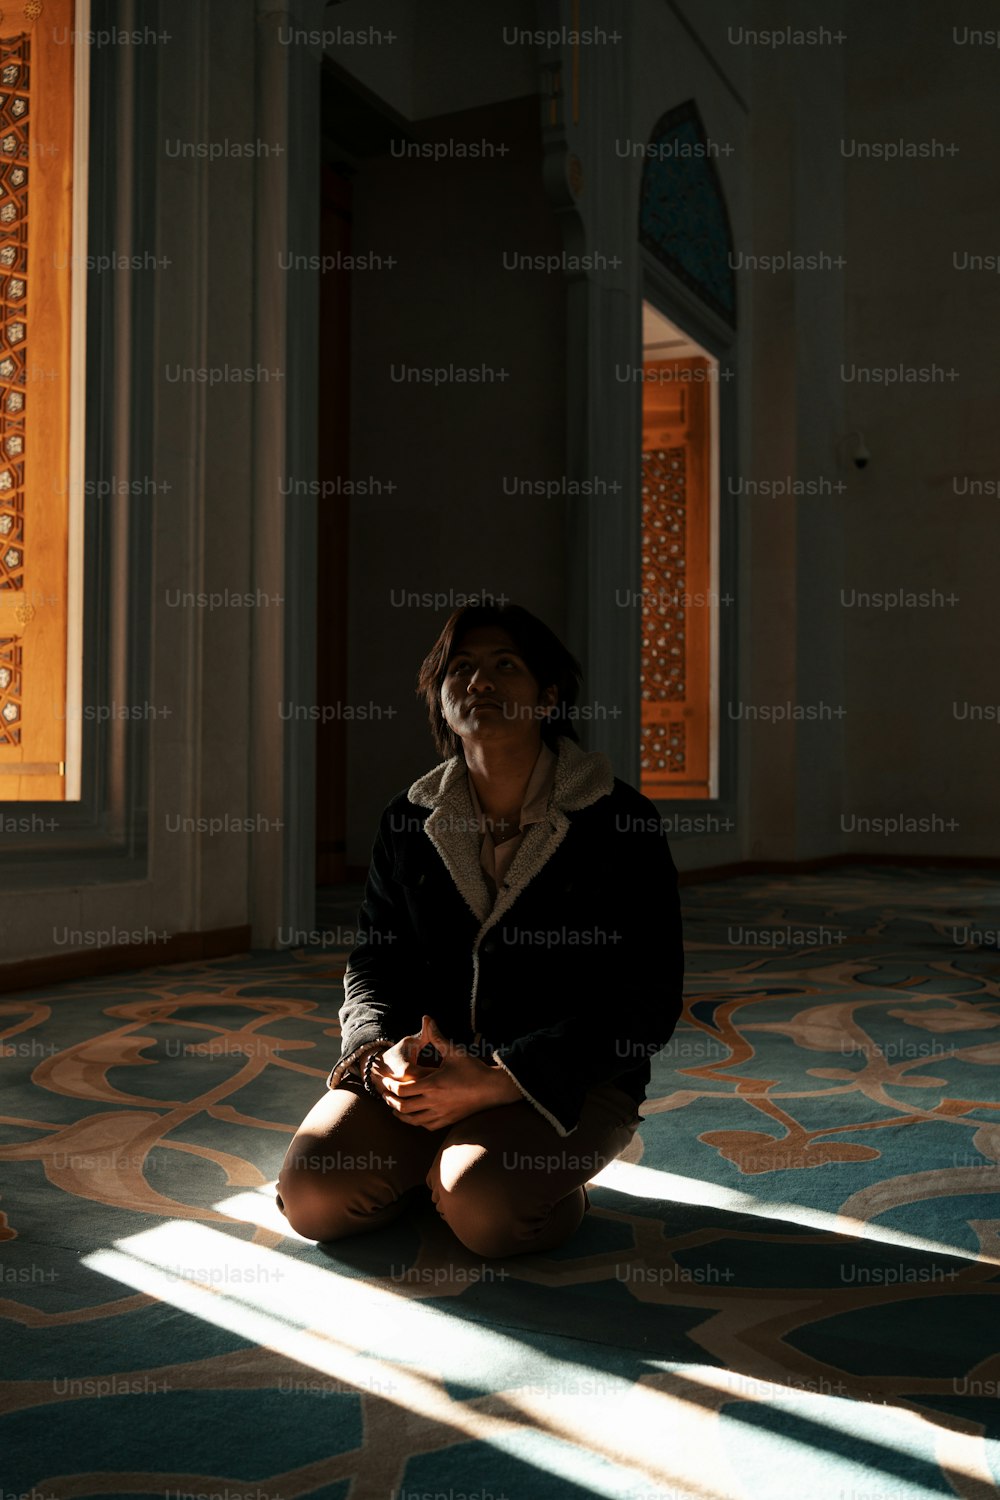 a woman sitting on the floor in a room